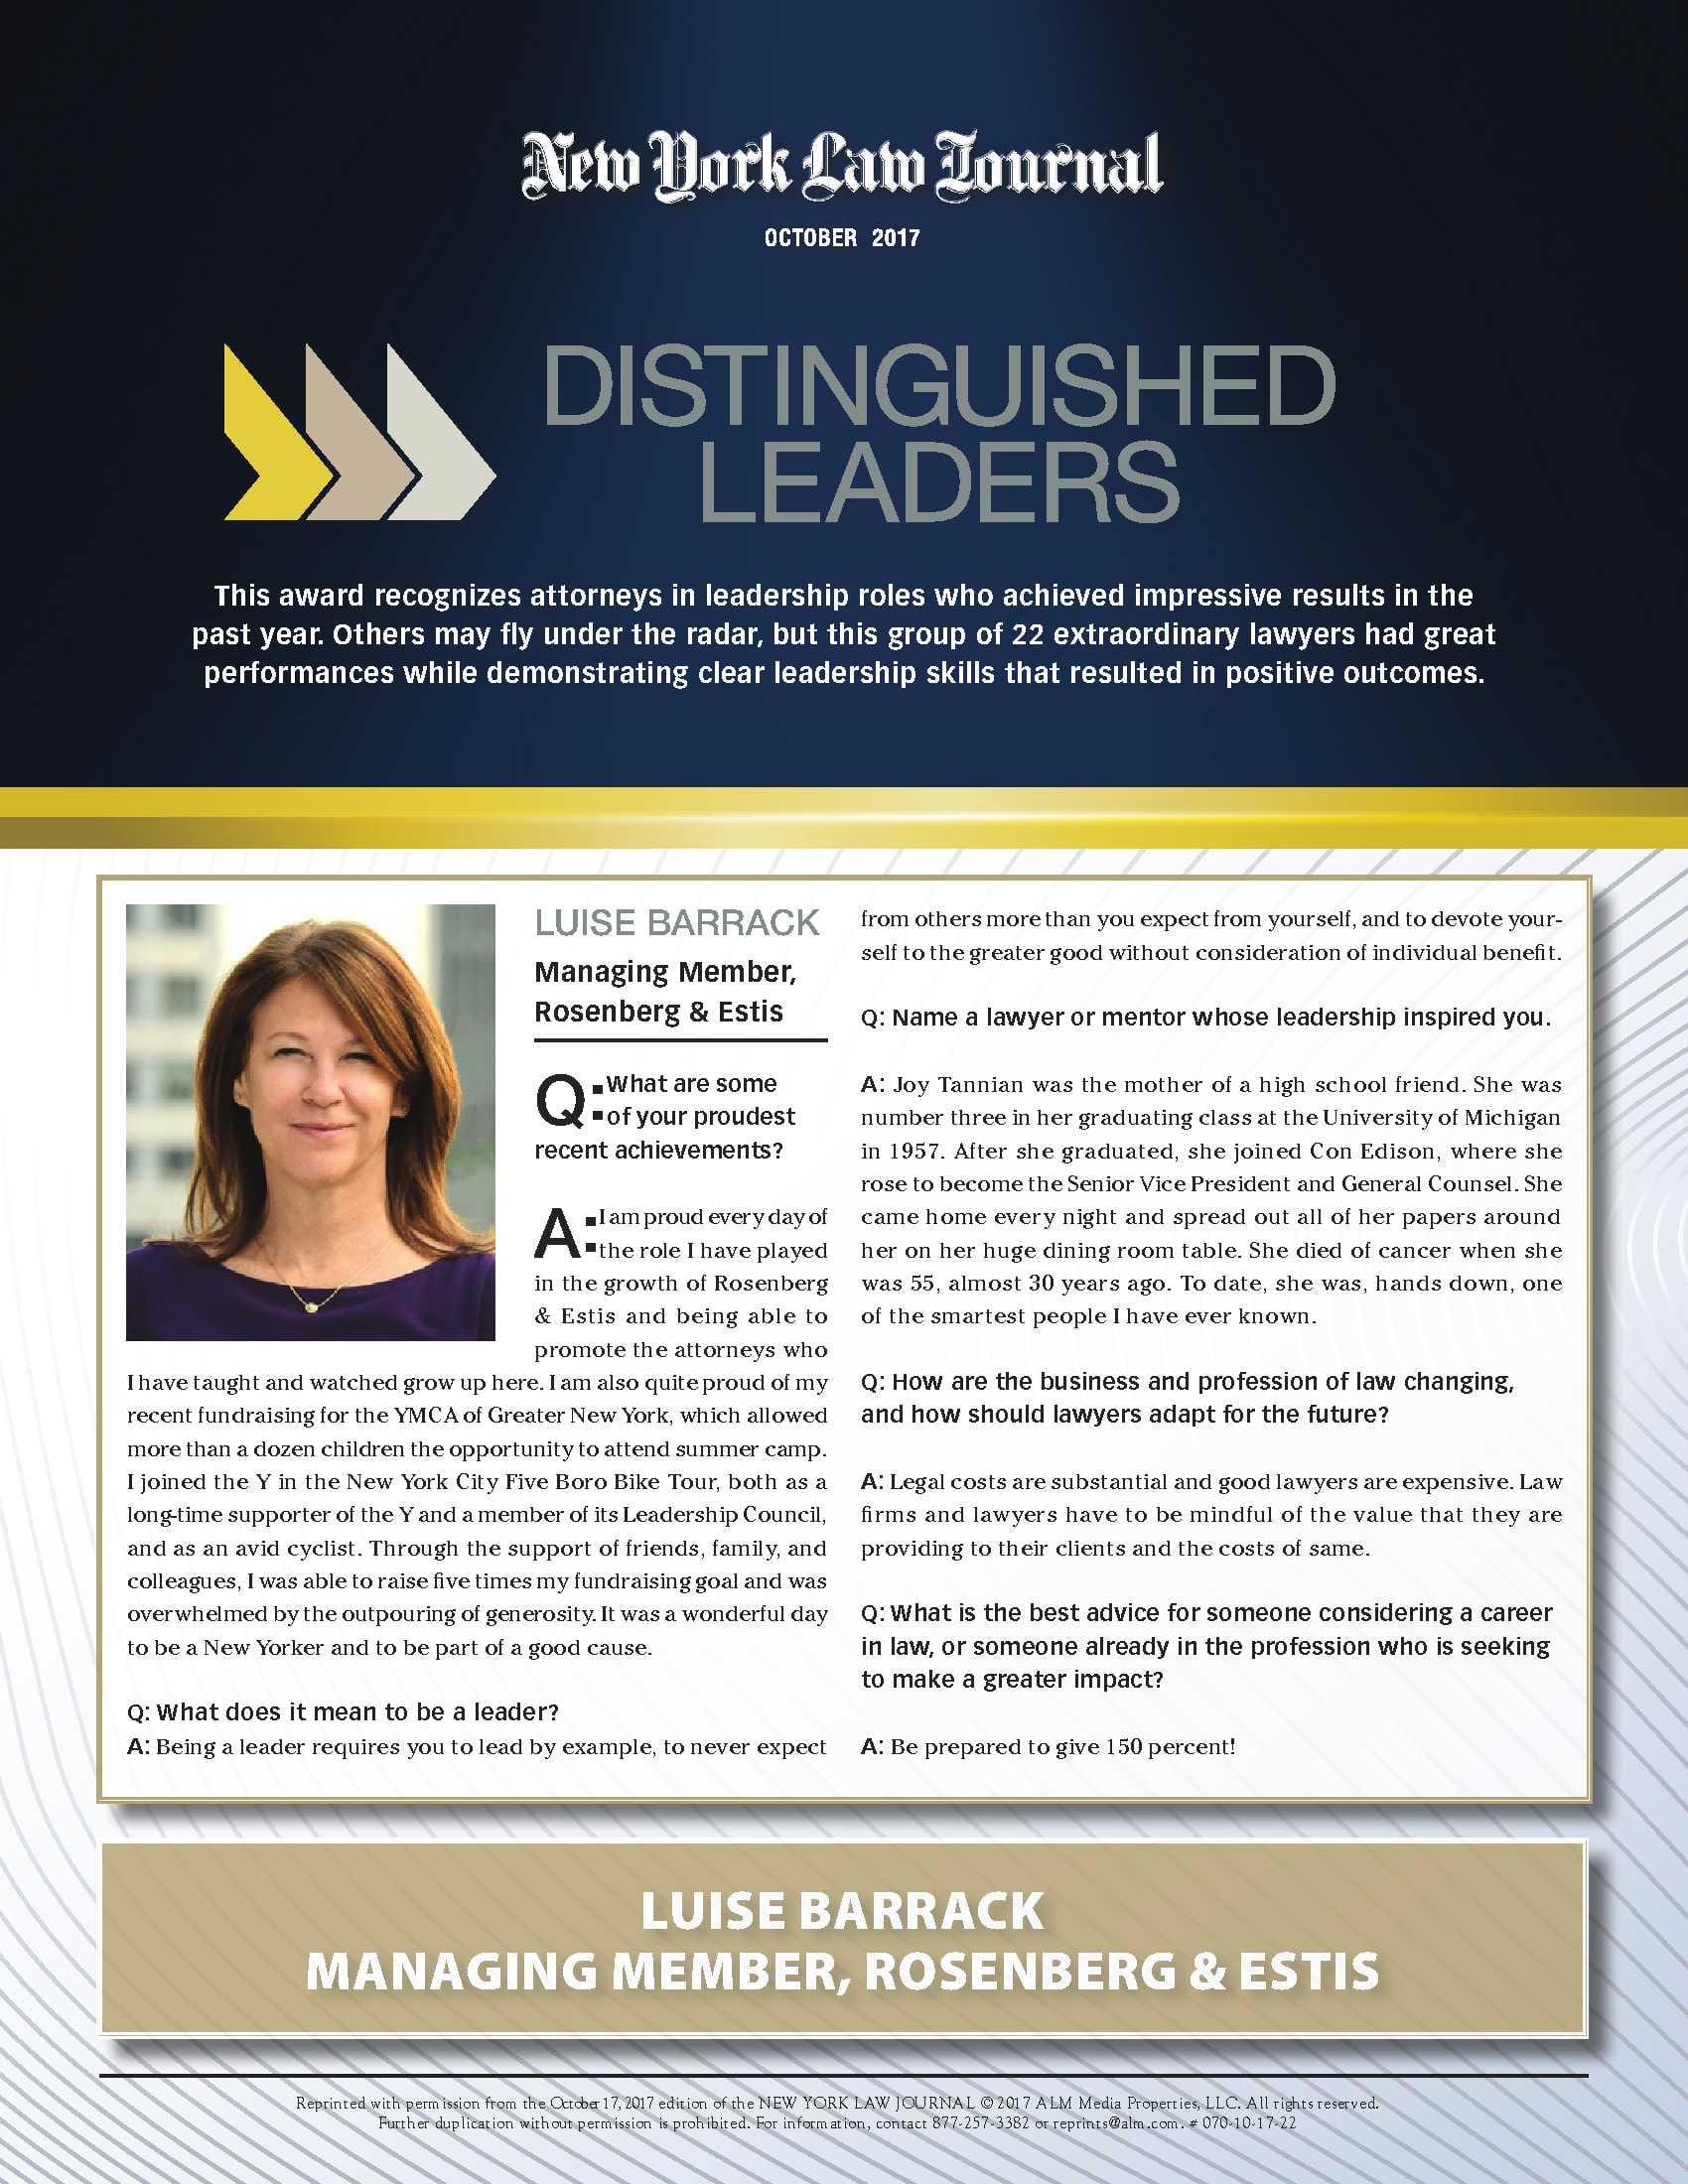 Photo of the New York Law Journal Featuring Luise Barrack as a Distinguished Leaders